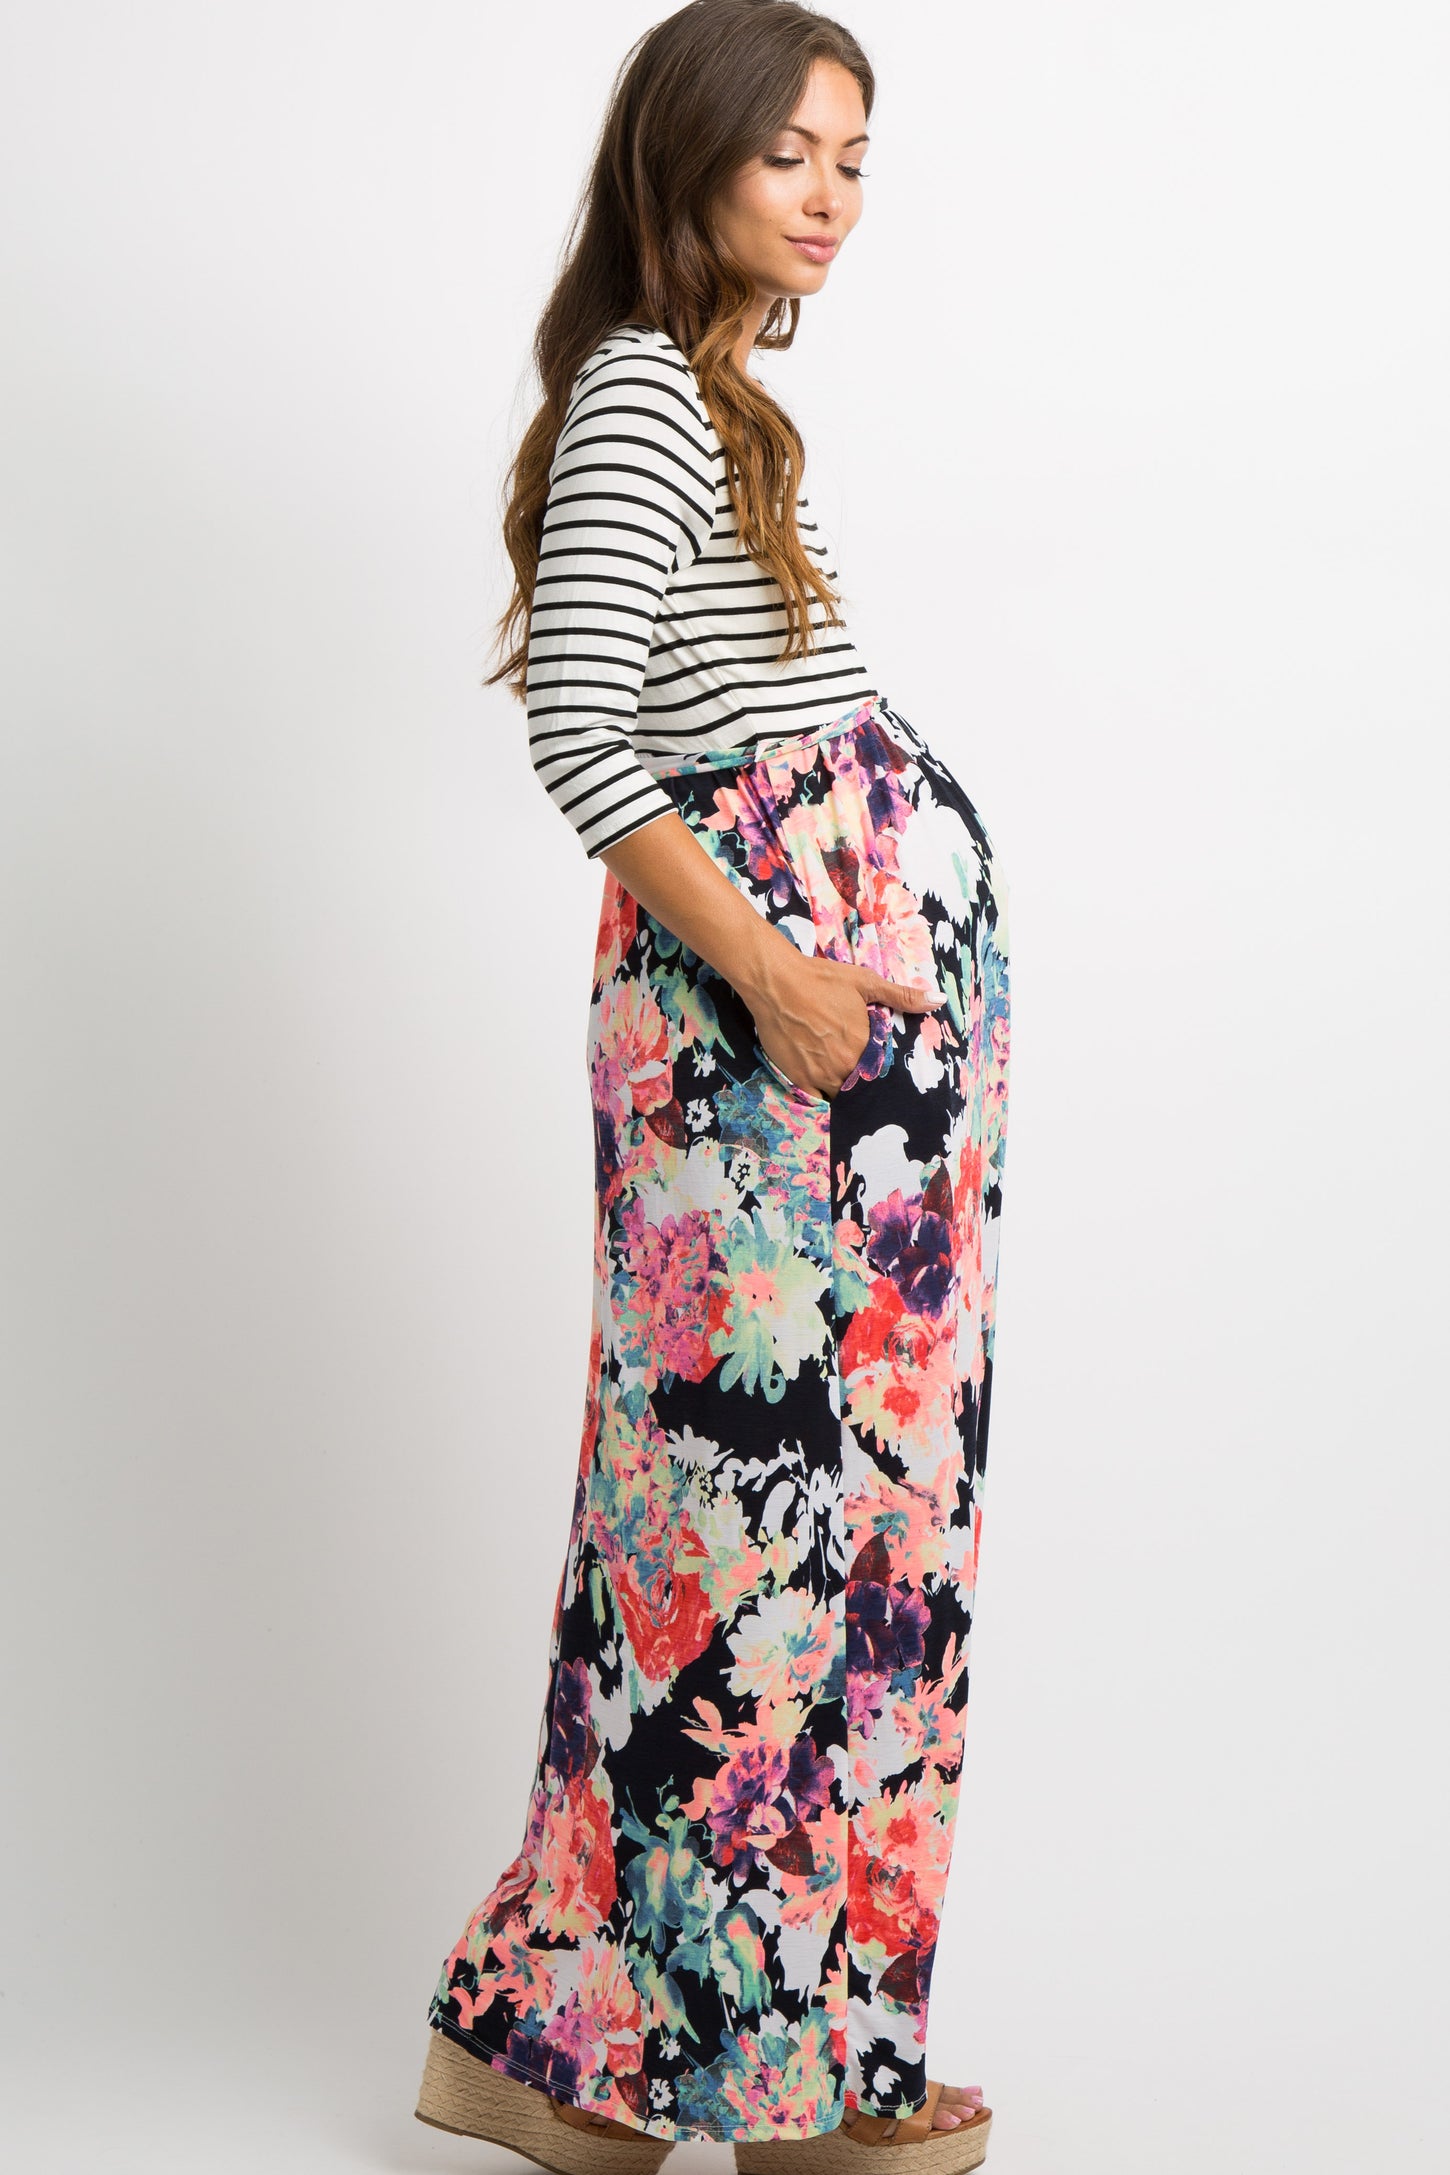 PinkBlush Navy Blue Neon Floral Striped Colorblock Maternity Maxi